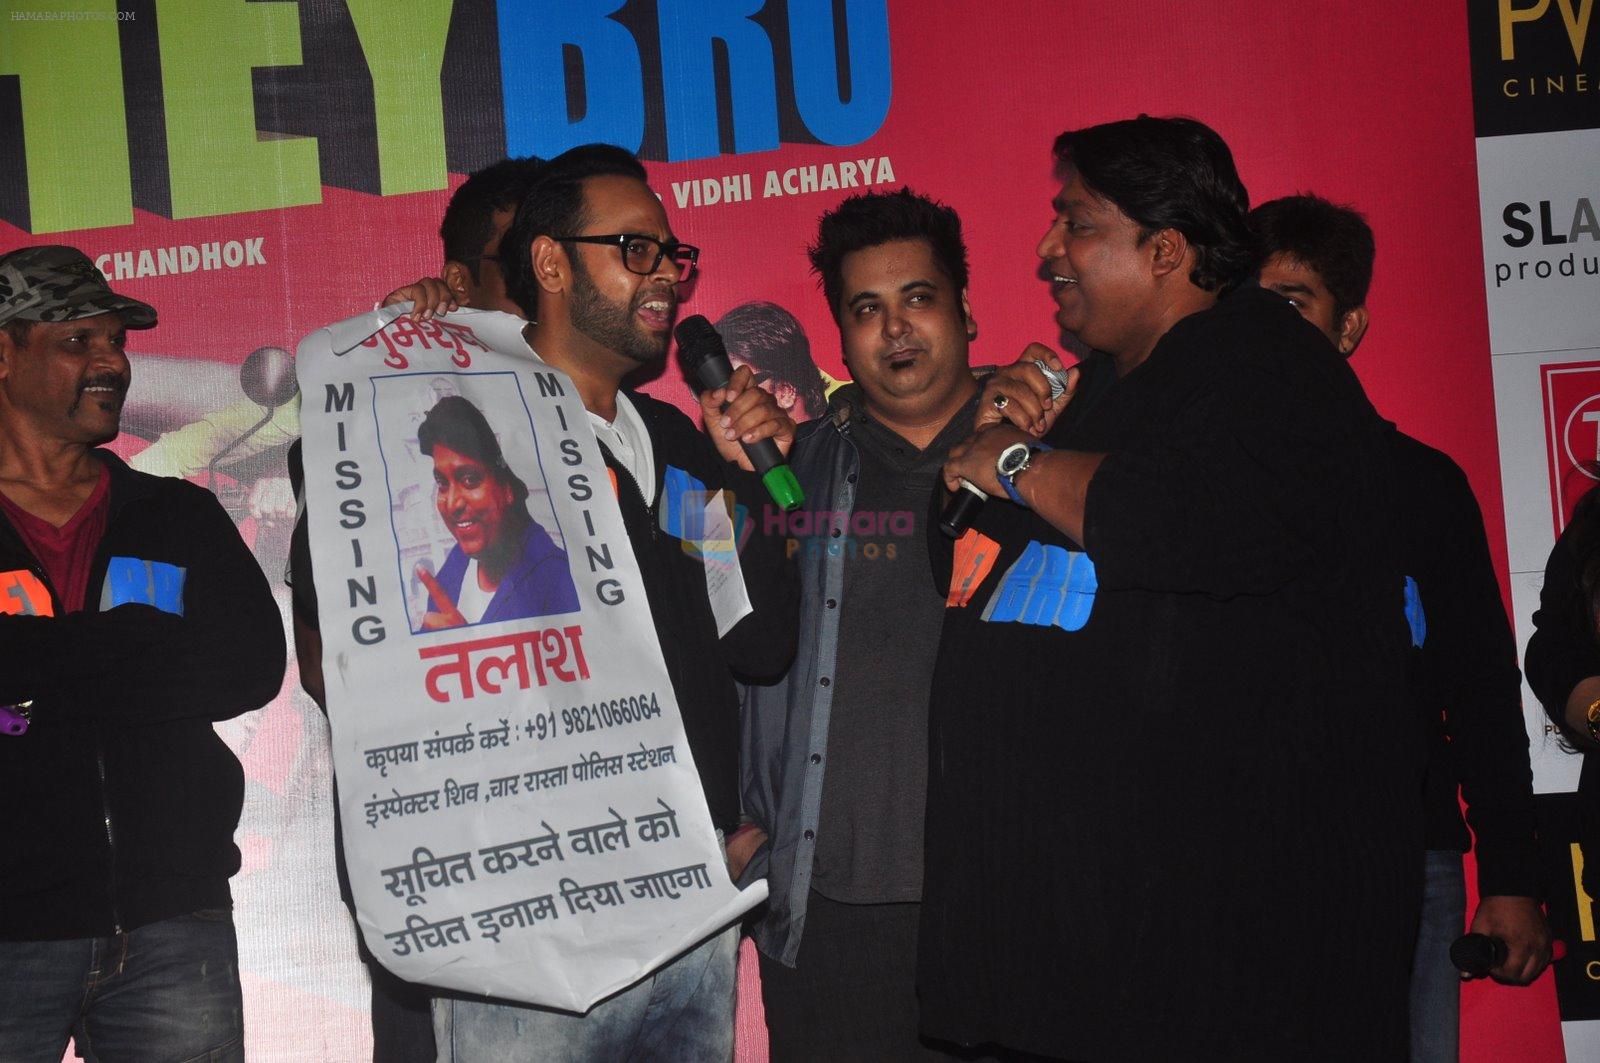 Andy, Ganesh Acharya at Hey Bro launch in PVR on 15th Jan 2015